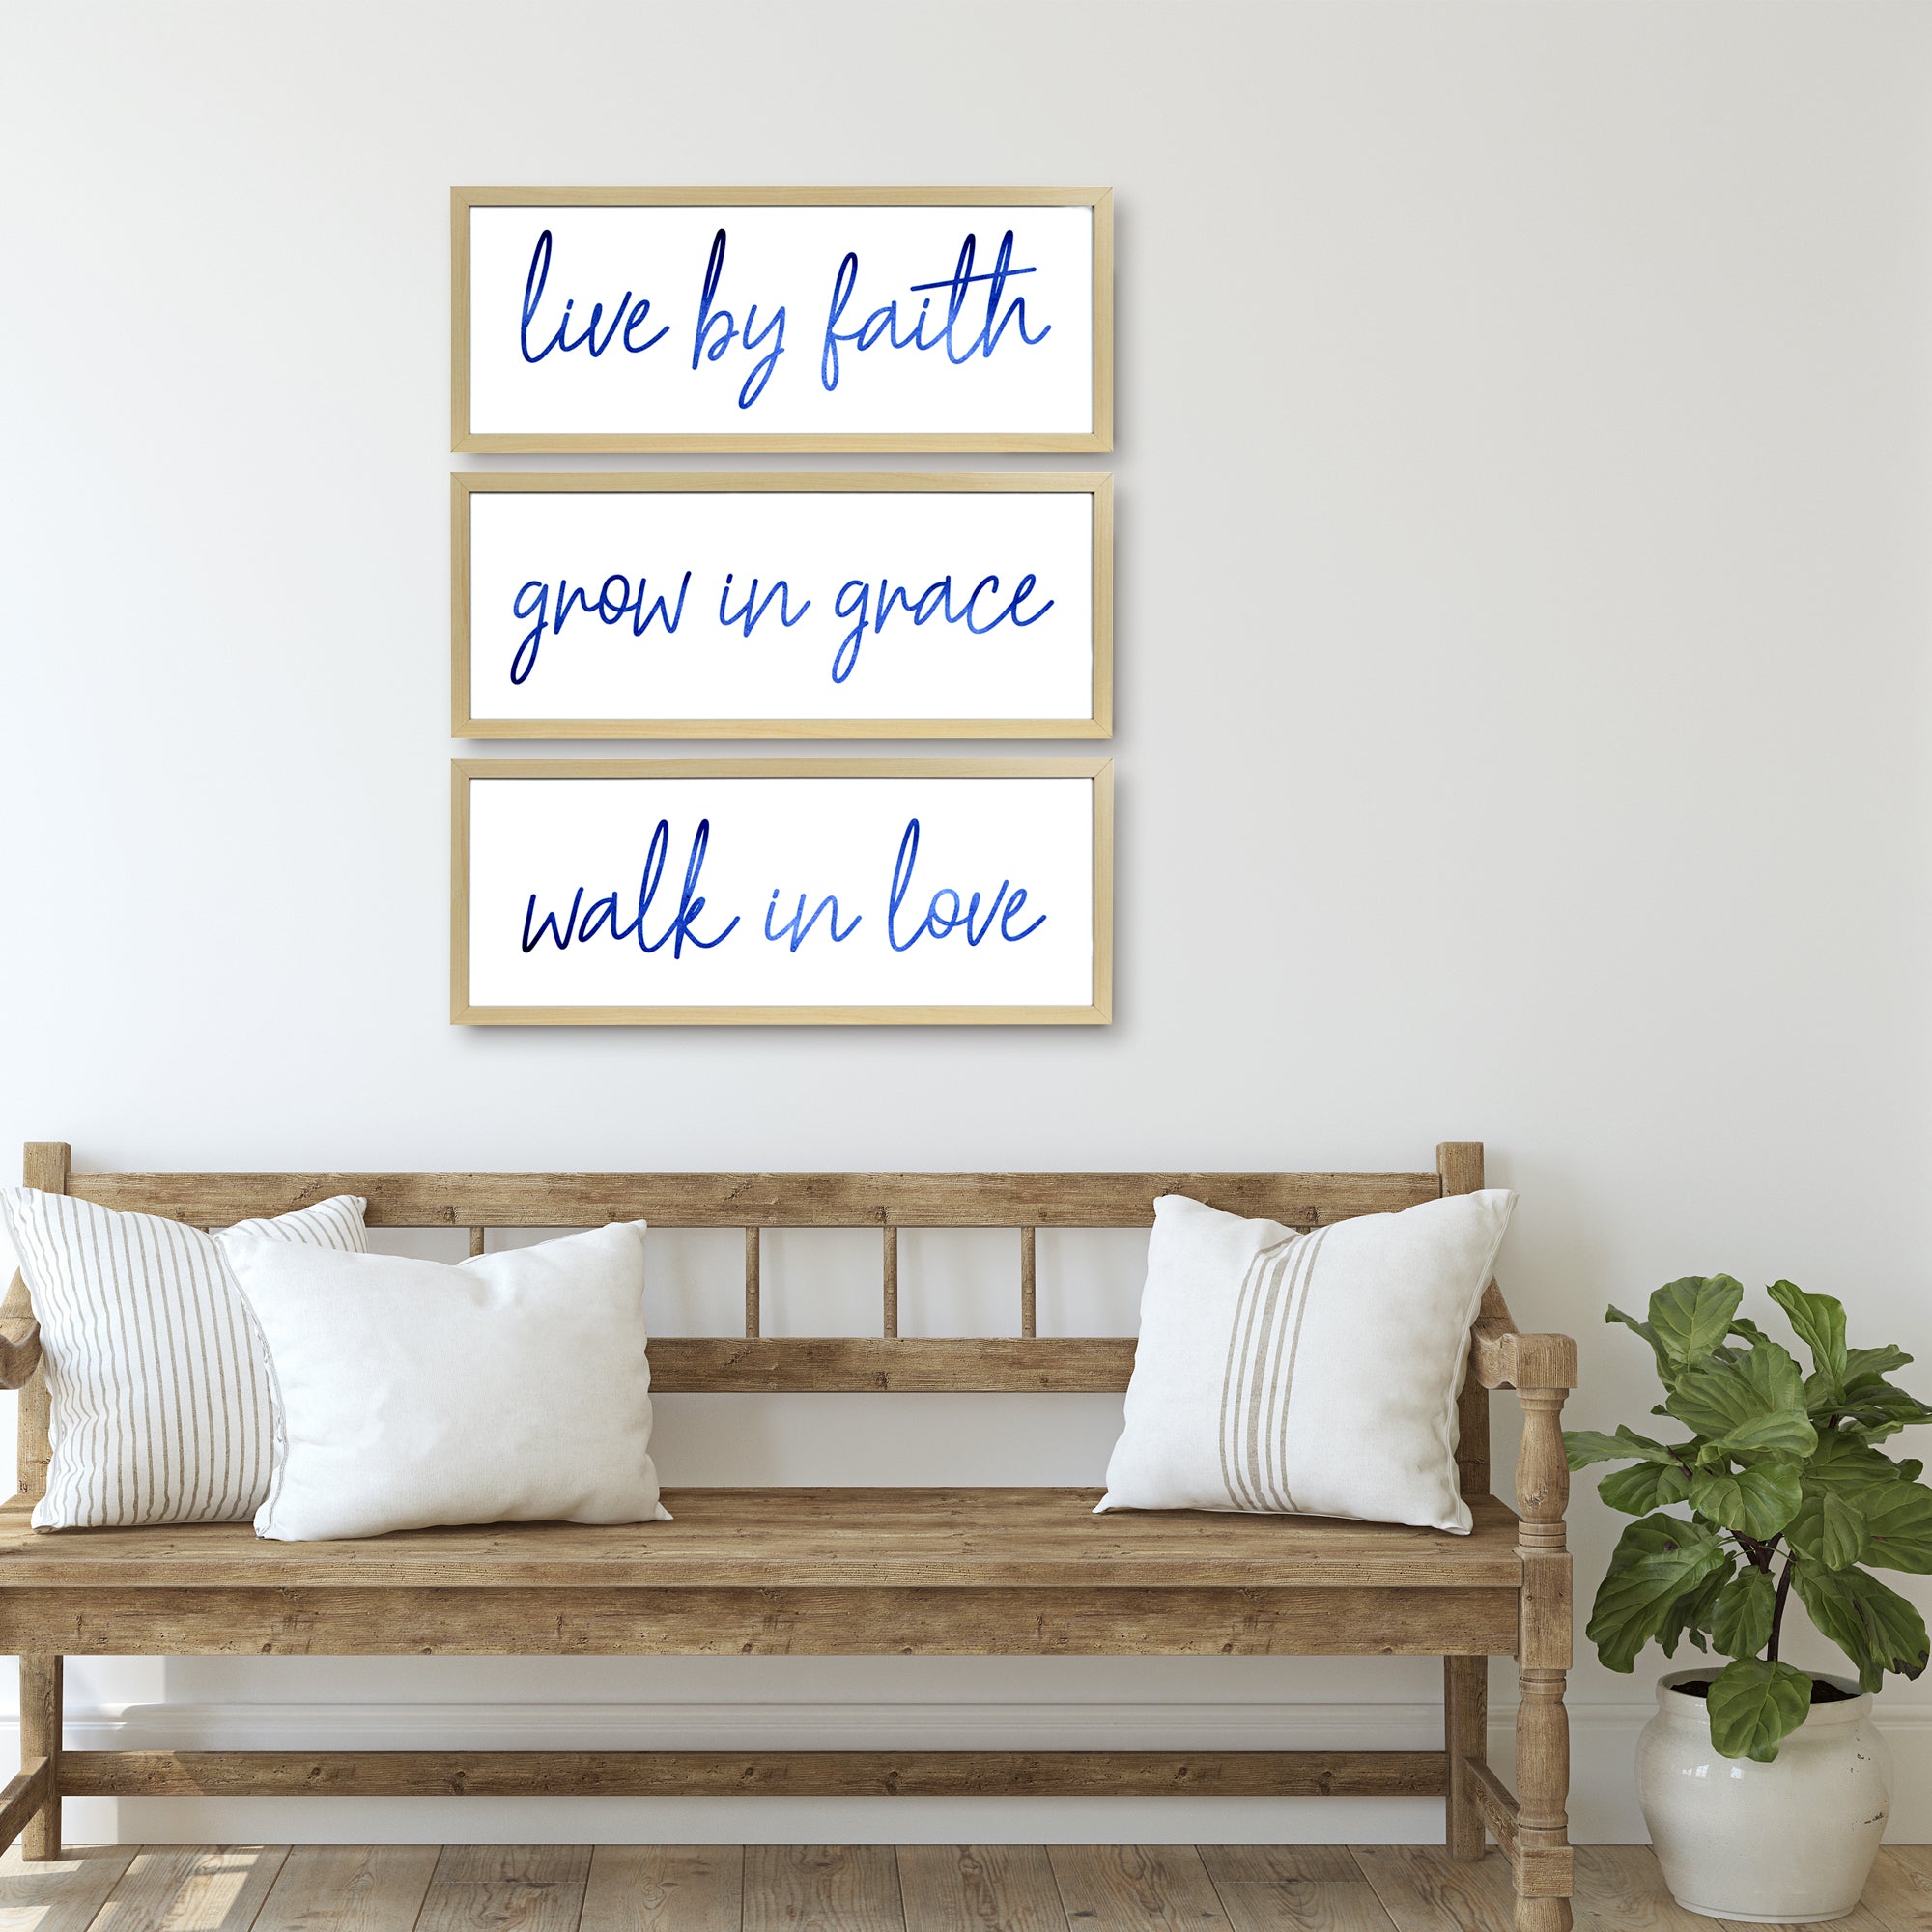 New View Studio 27"x 10.62"(Each) Live By Faith Decorative Hanging Wall Art 3-Piece Set